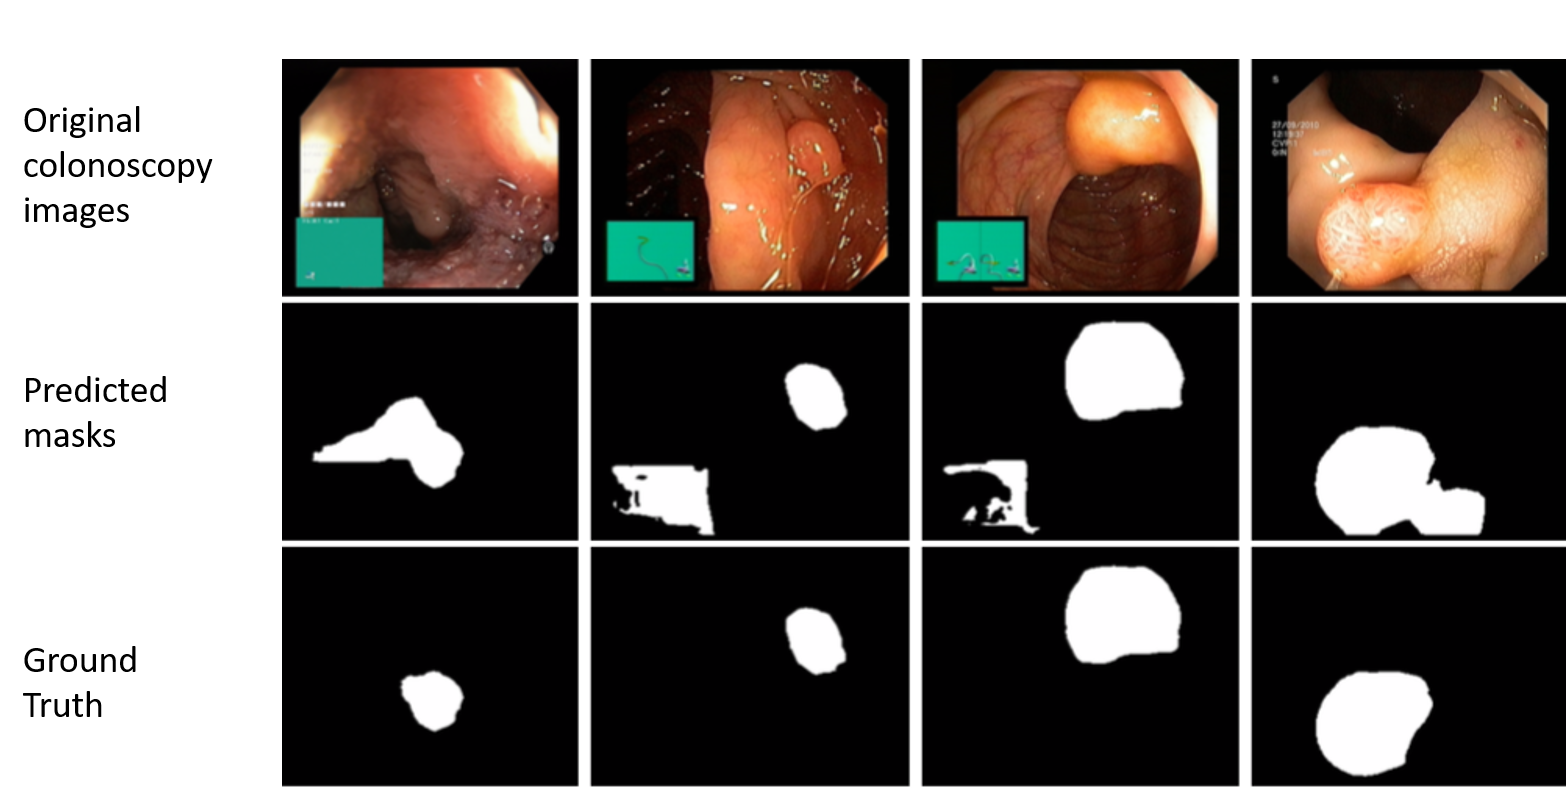 GI tract anomaly detection from endoscopy images